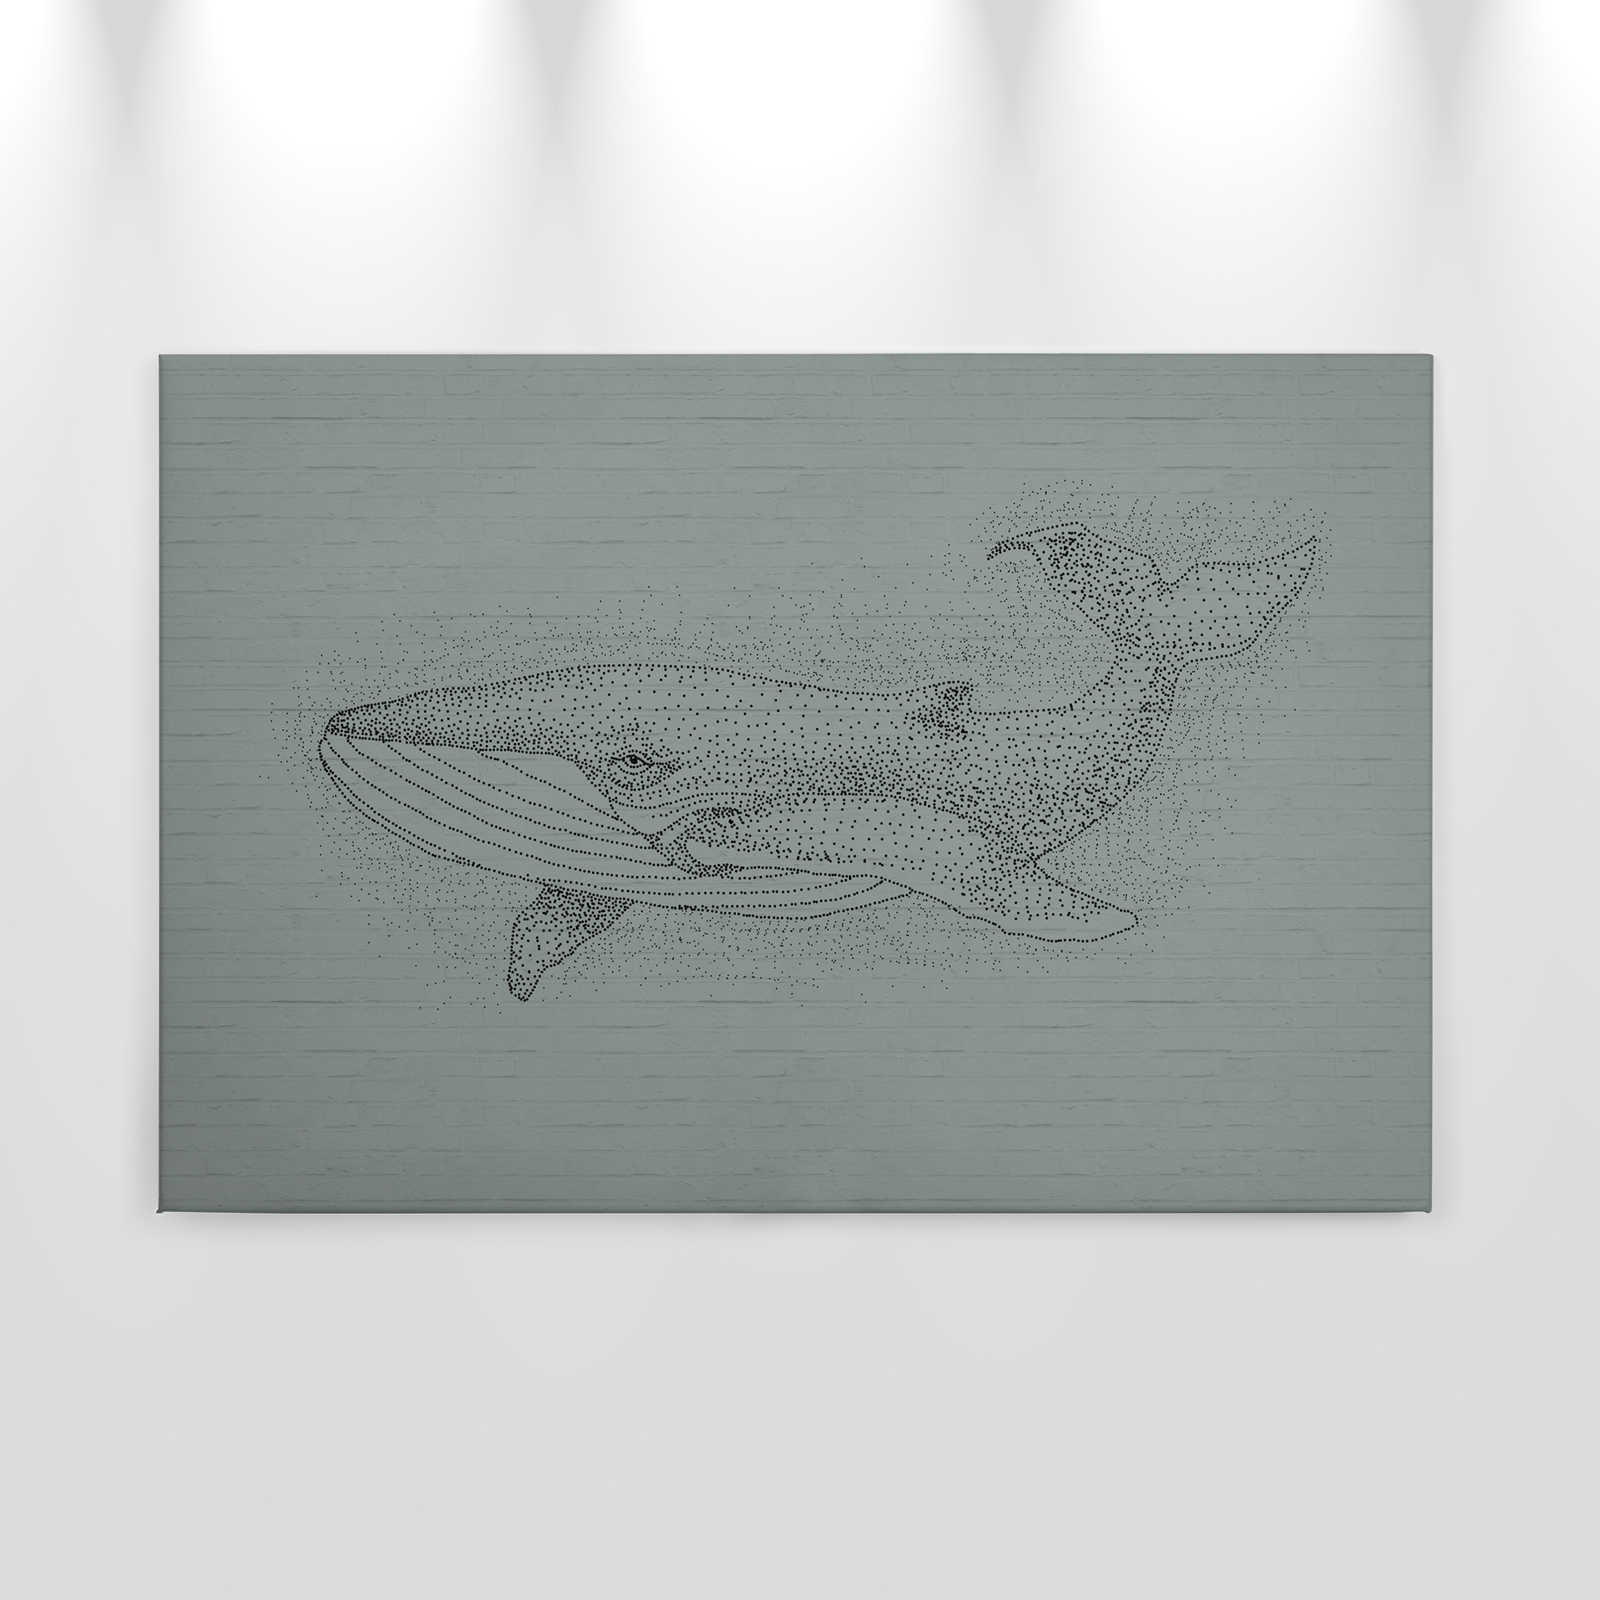             Stone Wall Canvas Painting with Whale Motif in Drawing Style - 0.90 m x 0.60 m
        